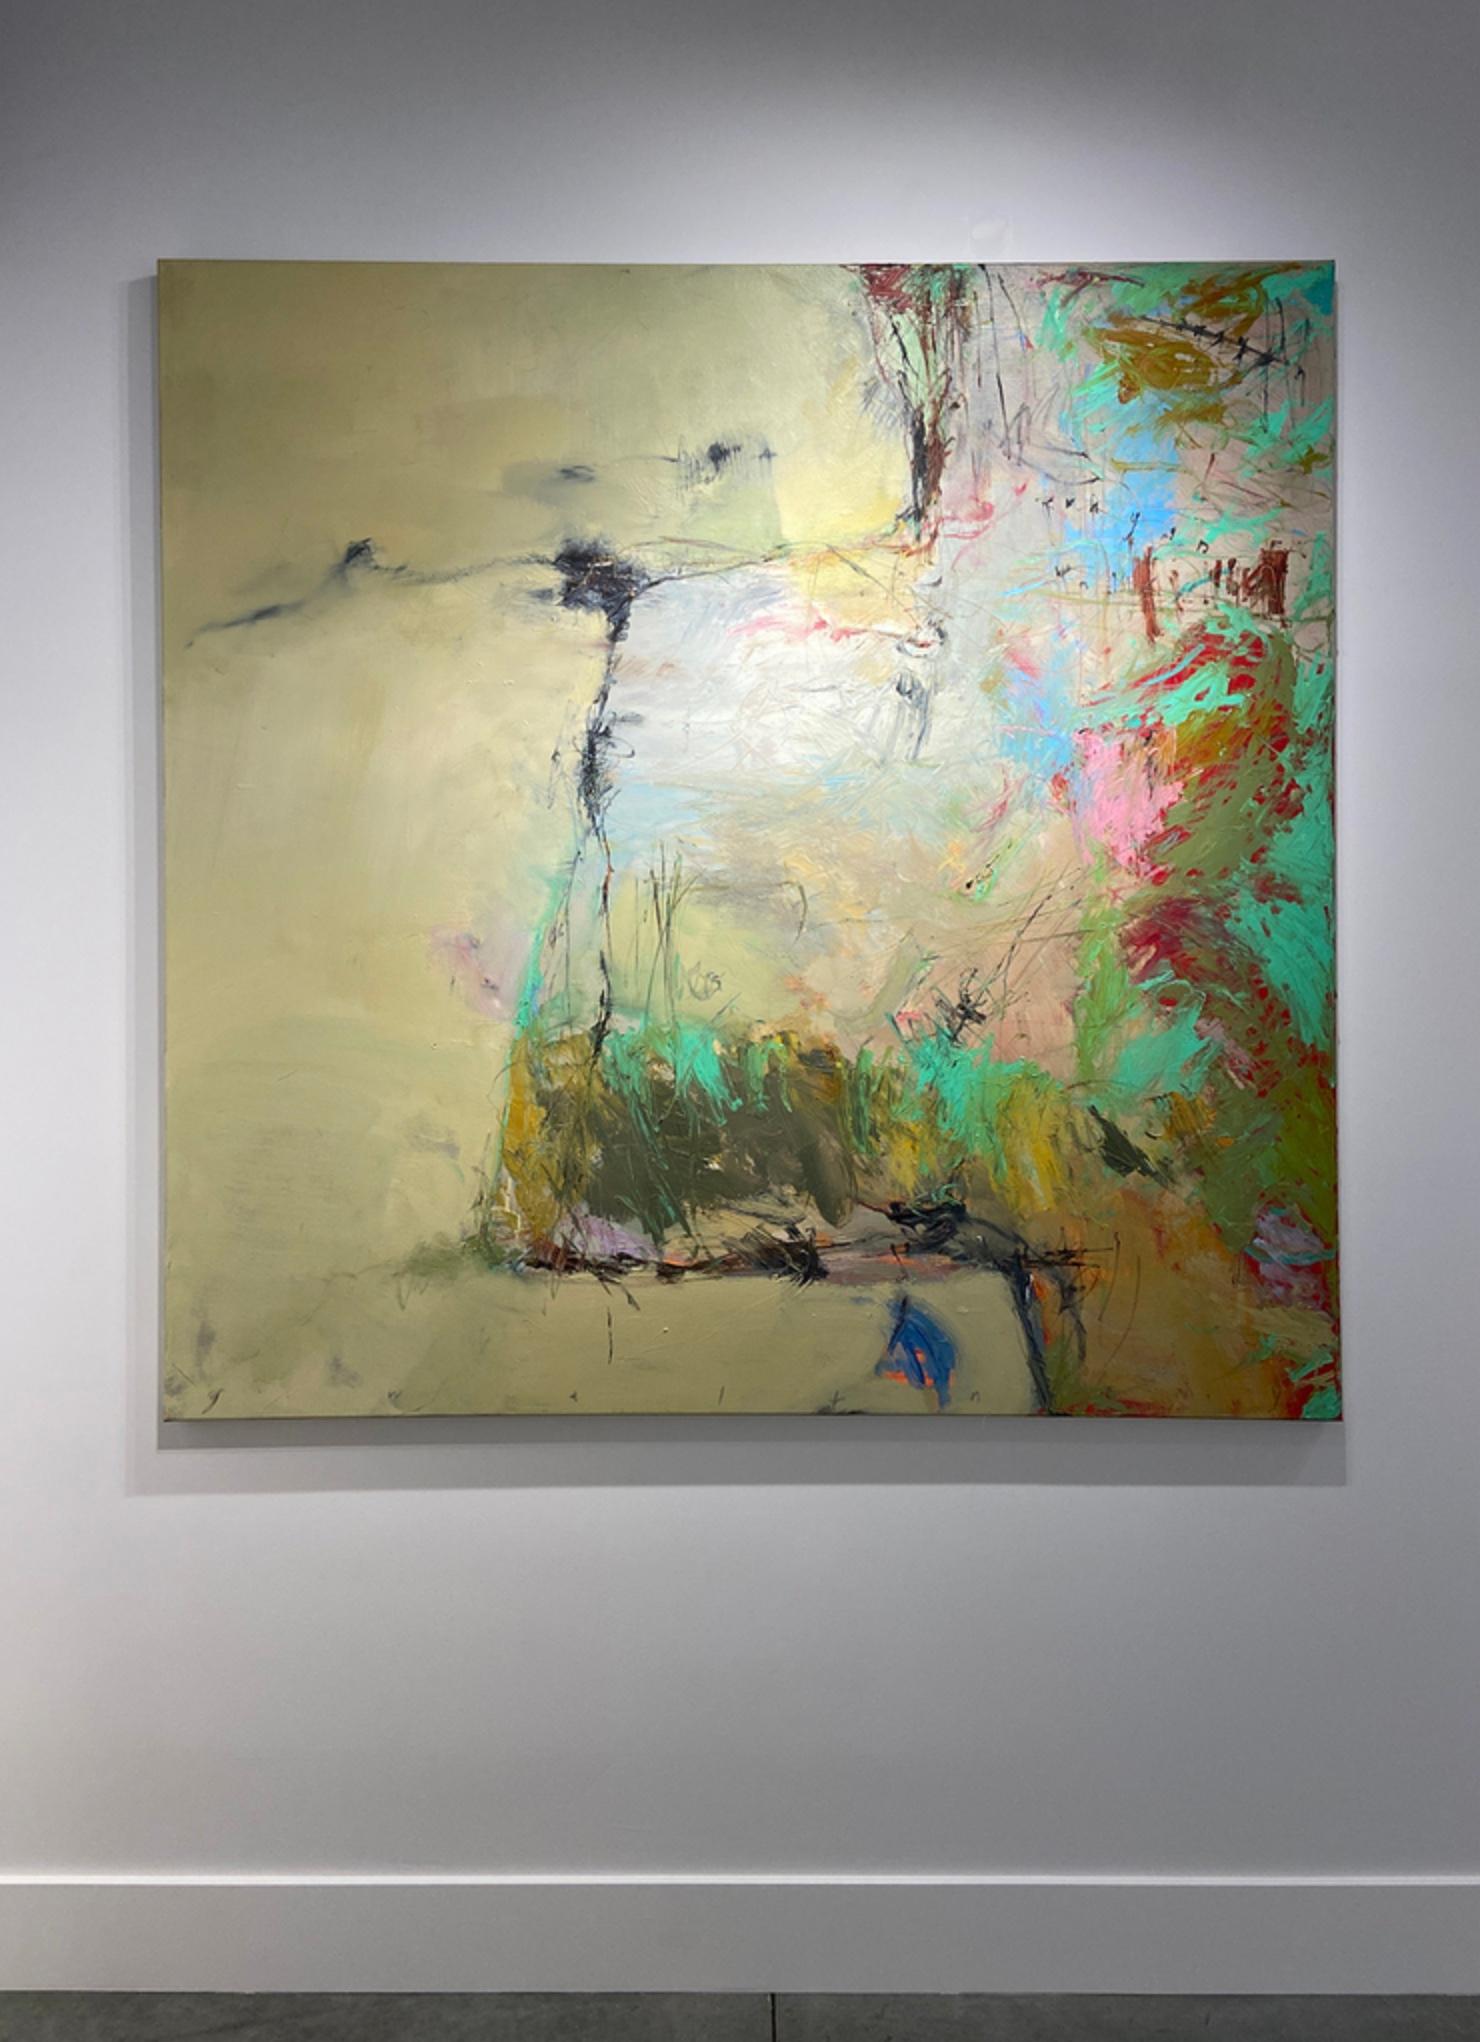 Crayons on Walls #17 - Abstract Expressionist Painting by Chris Gwaltney